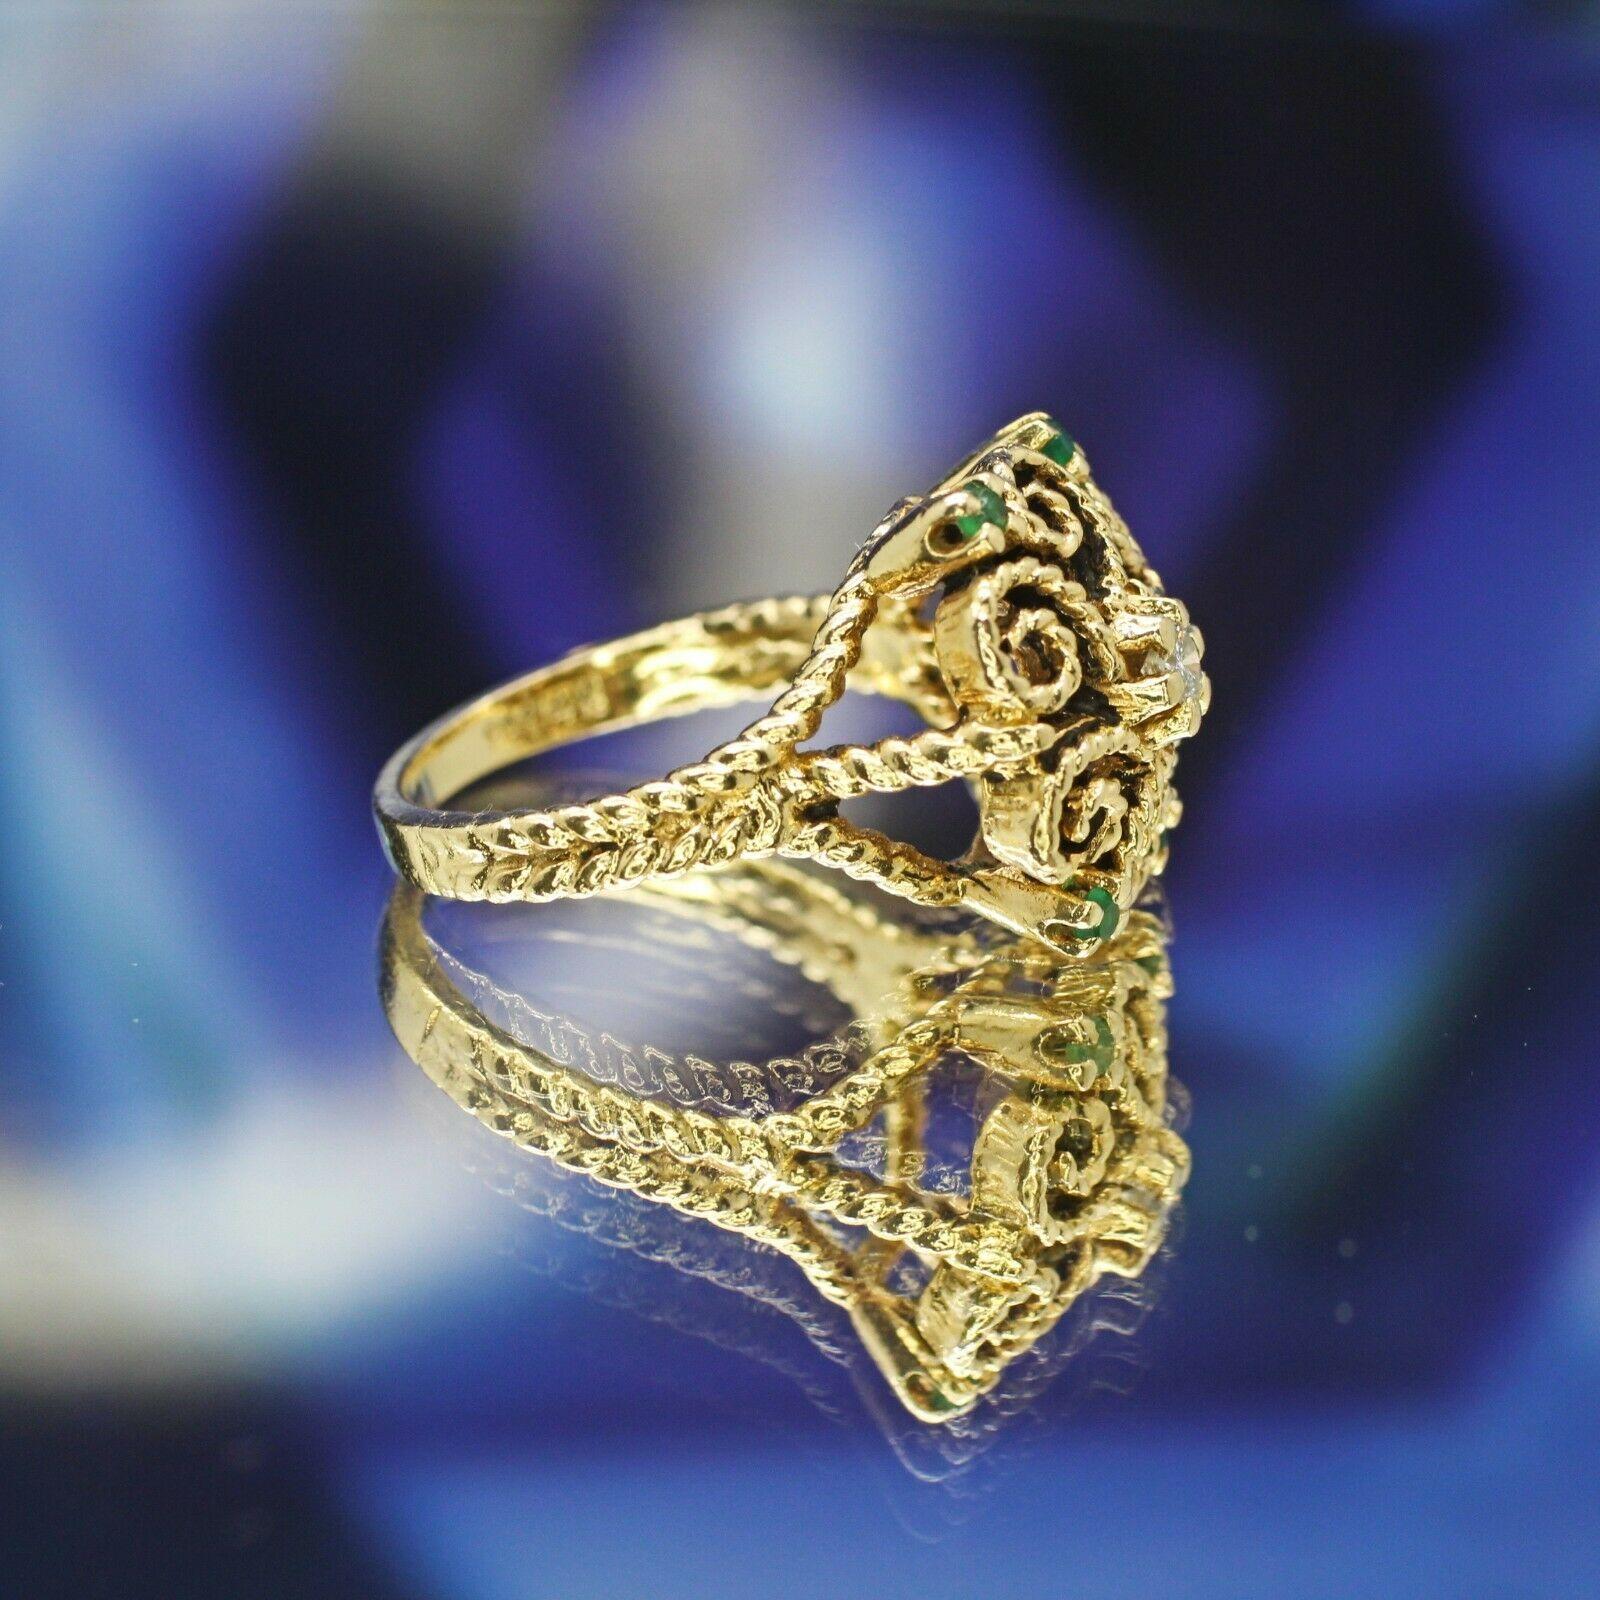   This is a very nice Art deco style filigree ring with round cut diamond in approximately 0.09 ct, and 4pcs round cut emerald stones in approximately 2mm each. This ring crafted in 14k yellow gold metal in size 6.75us. 
Specifications:
    main